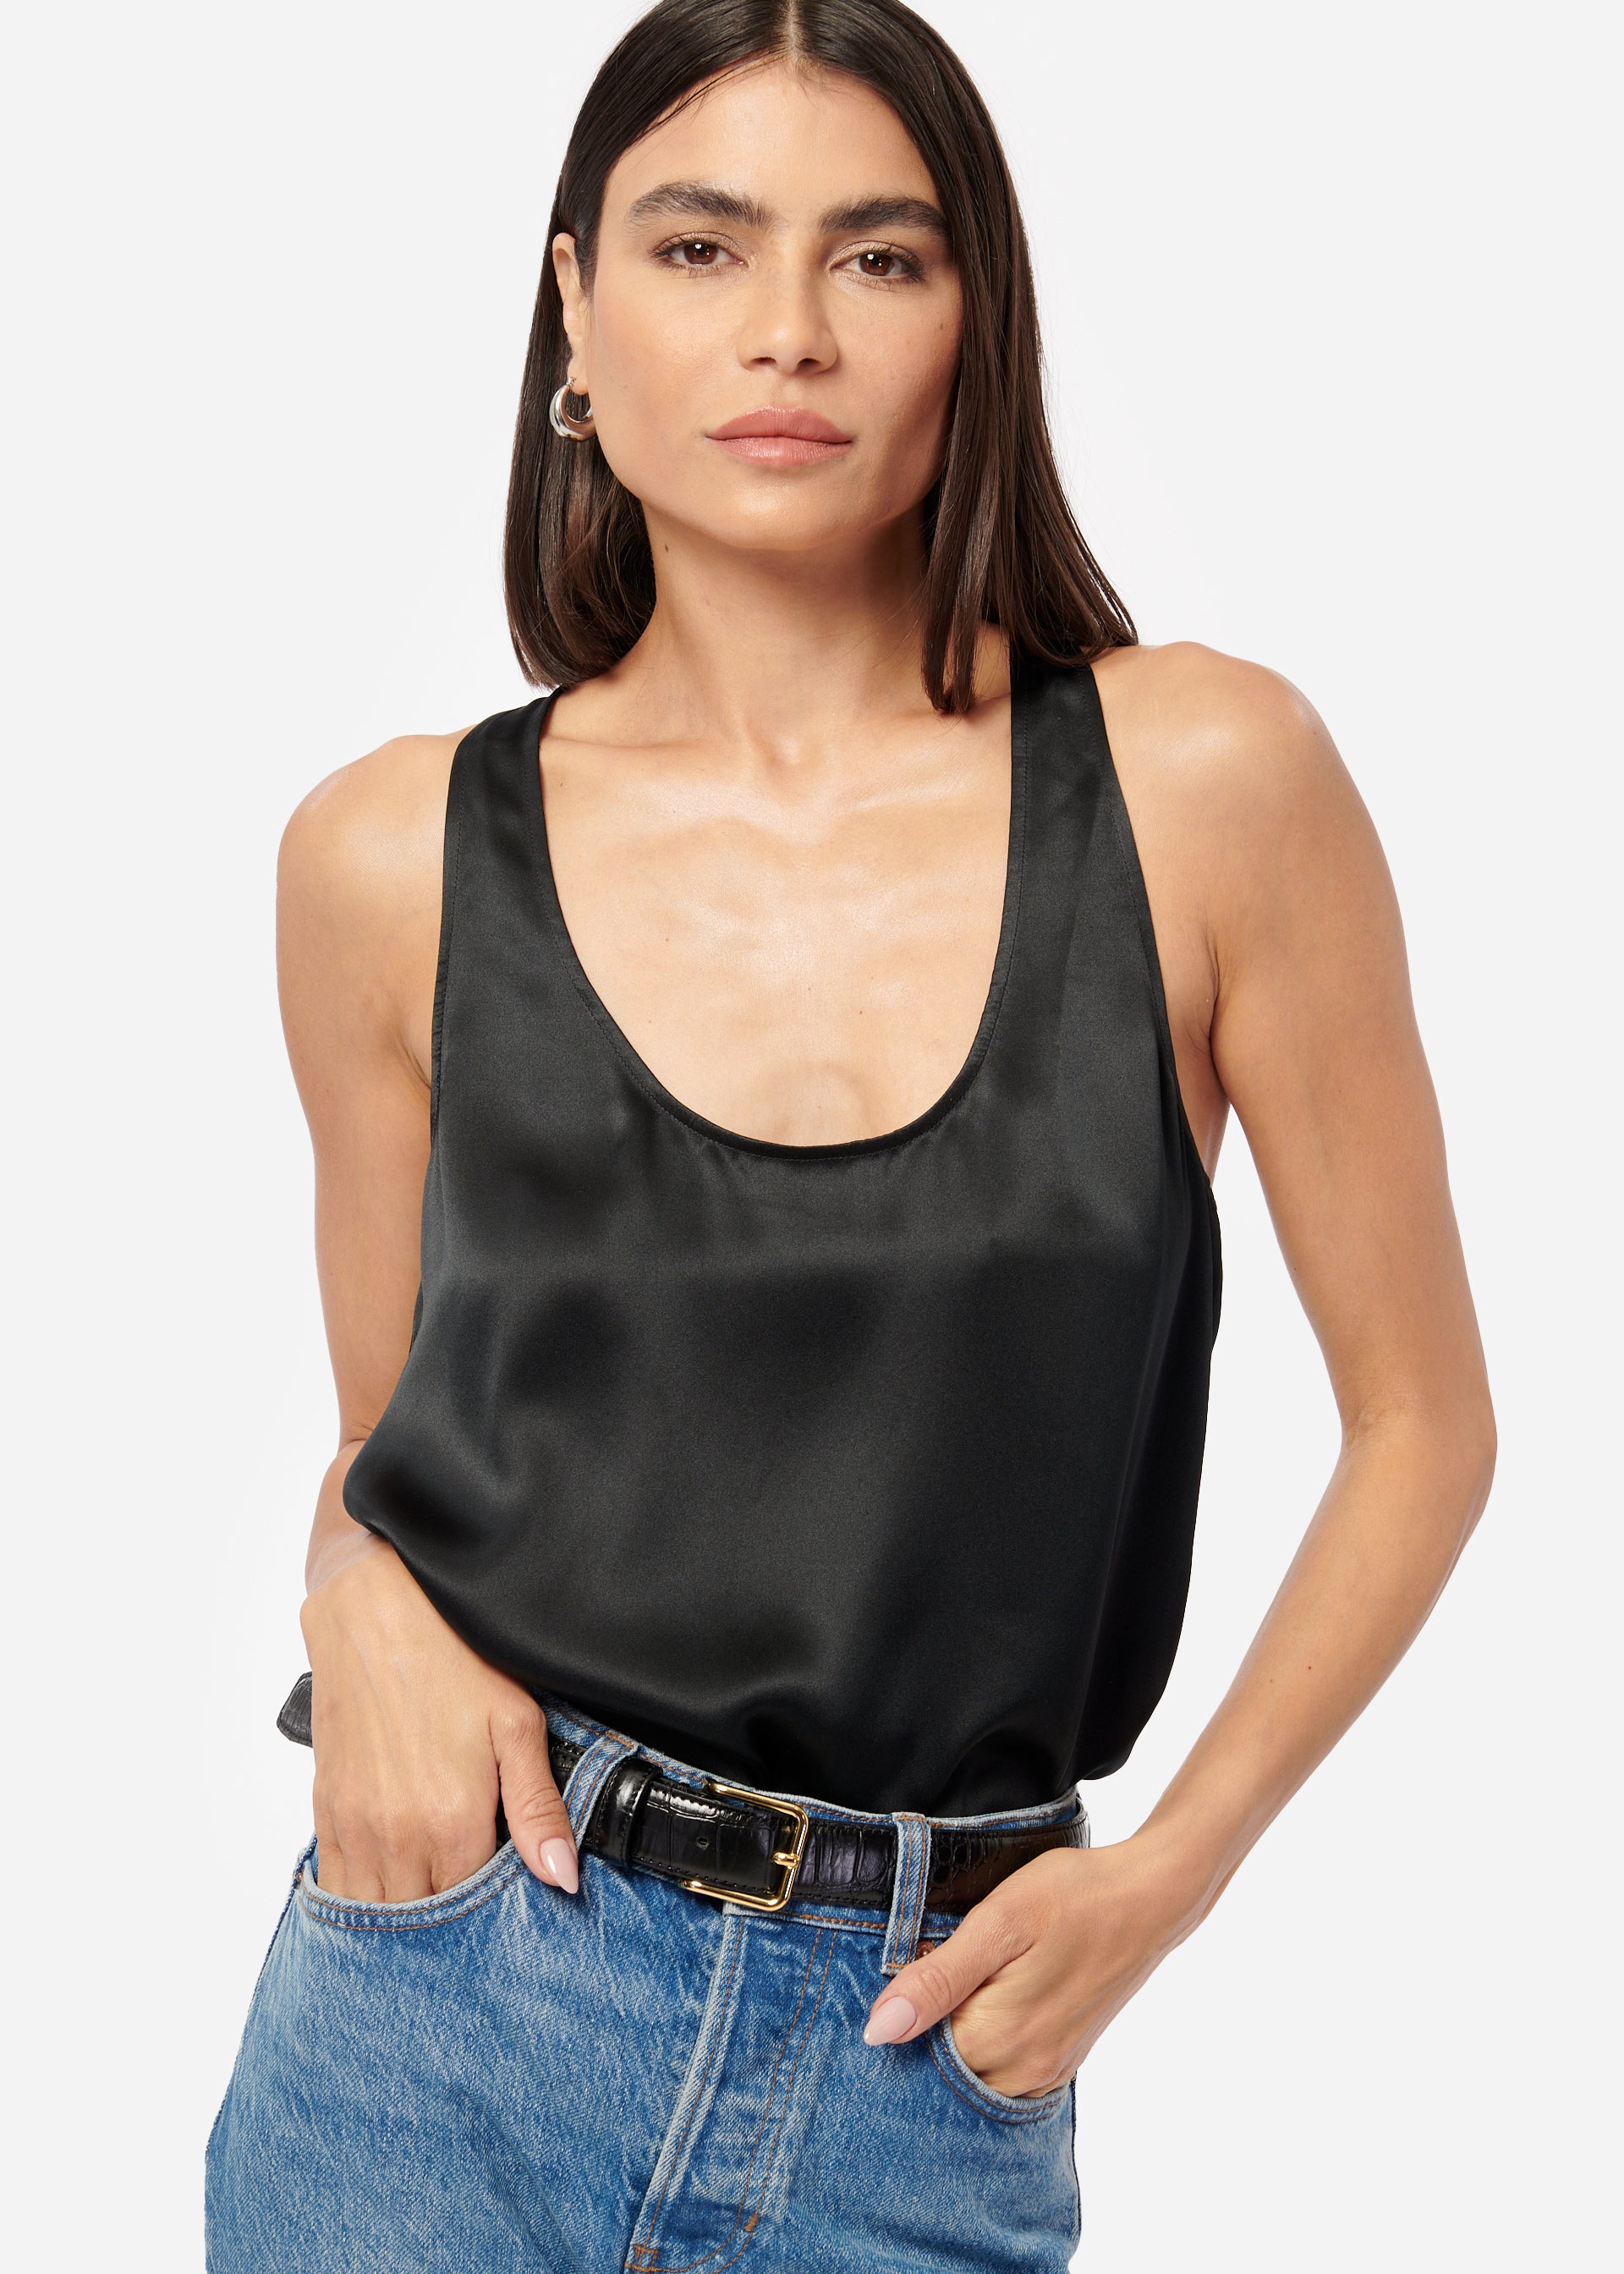 CAMI NYC V-Neck Camisoles for Women